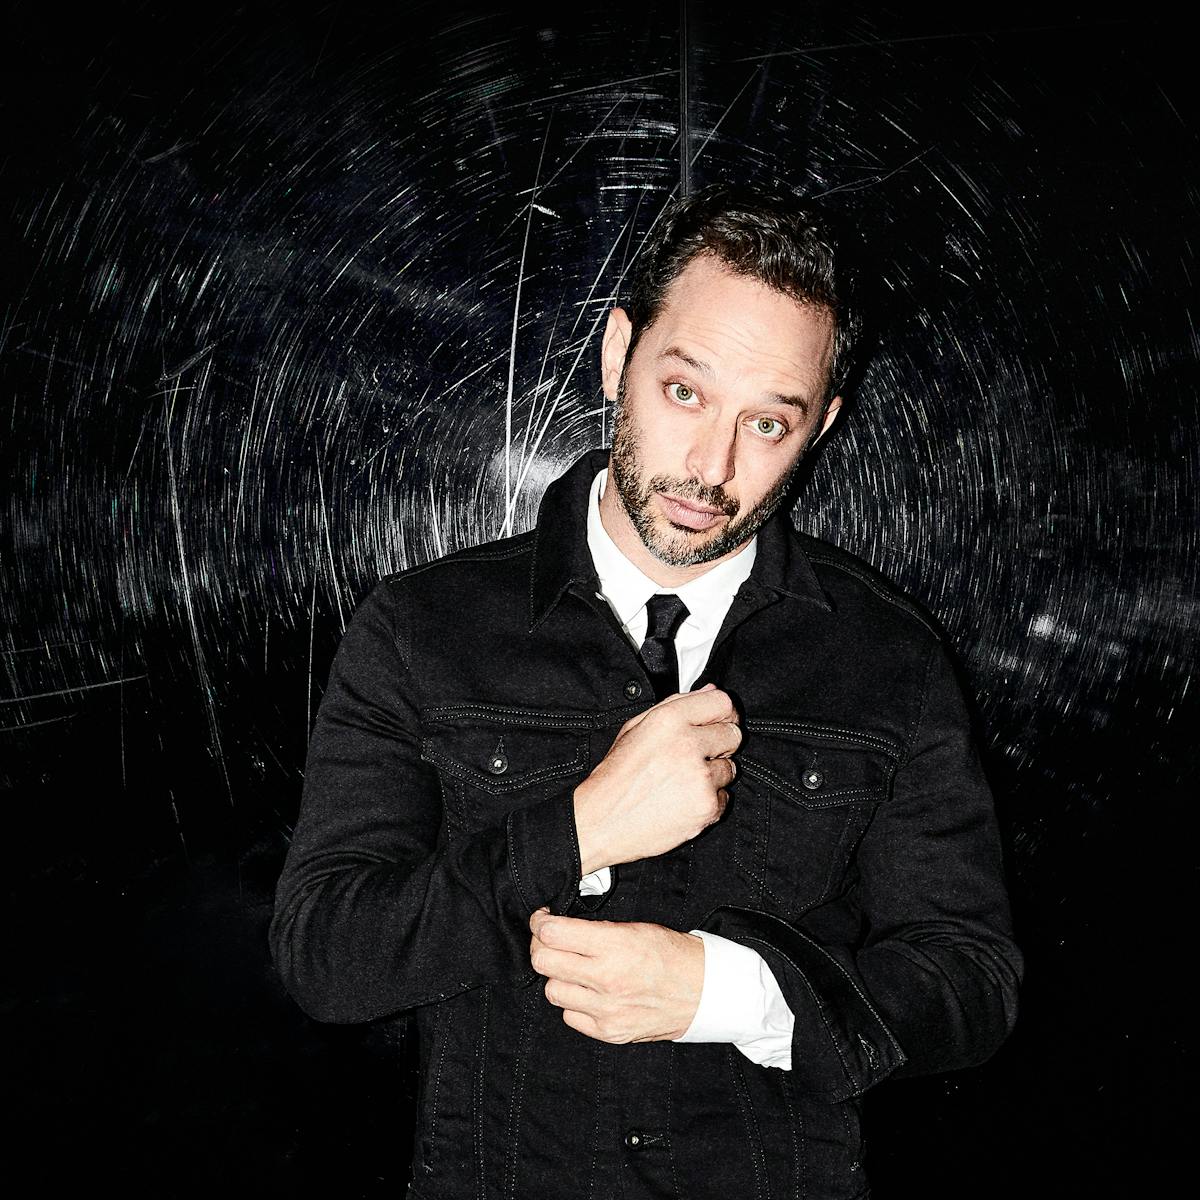 Nick Kroll wears a black suit, black tie, and white shirt and looks at the camera. Behind him is a black background with his name written many times in light grey.